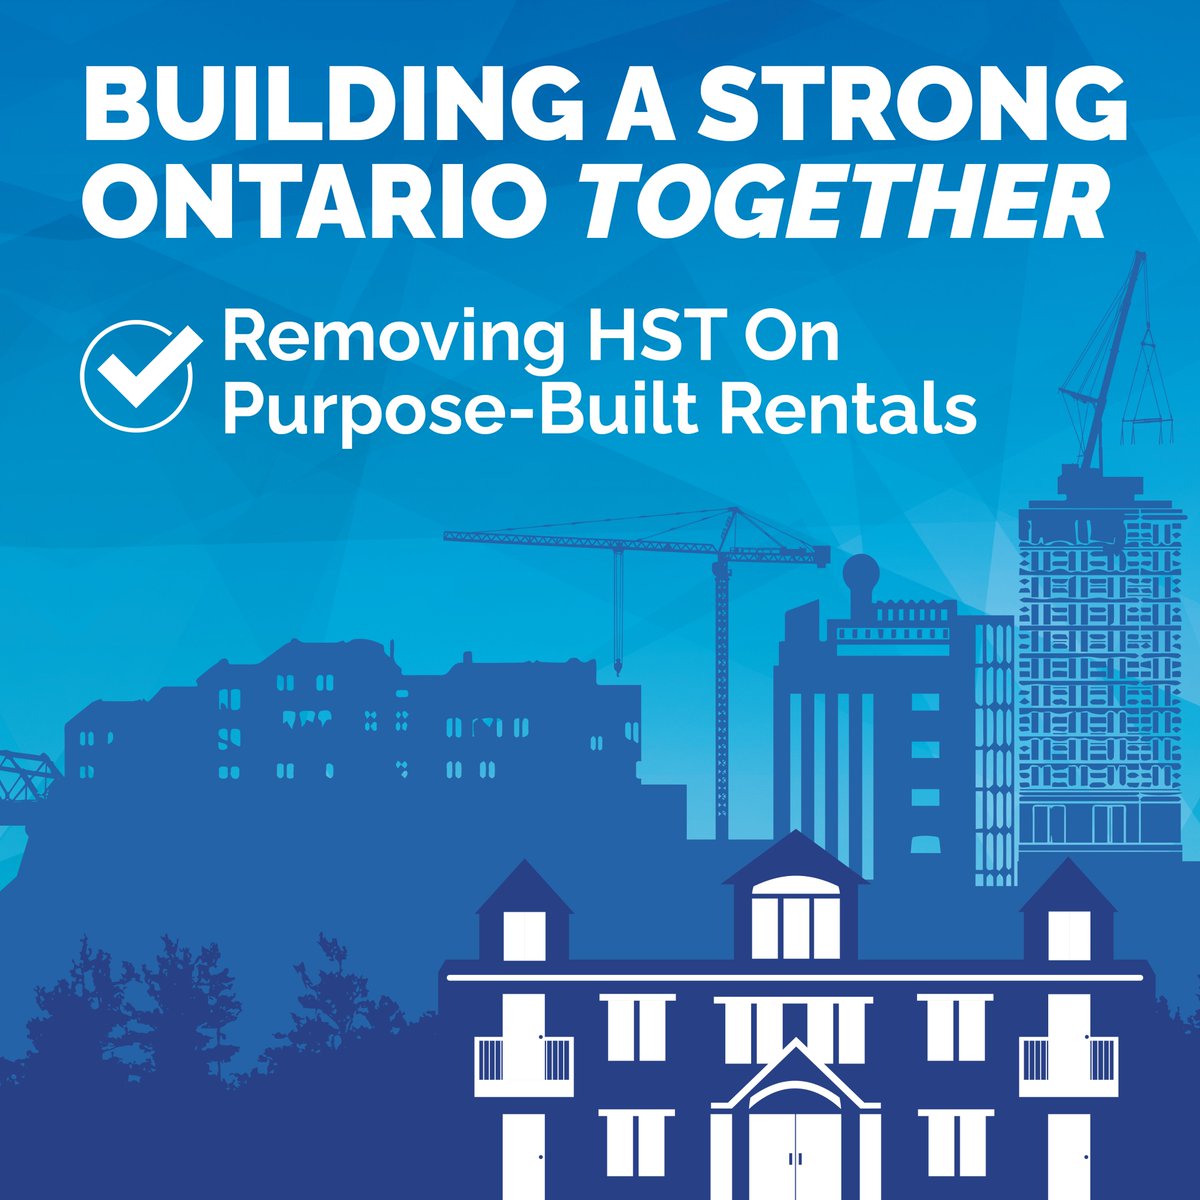 Our government is taking steps to enhance the Ontario Harmonized Sales Tax (HST) New Residential Rental Property Rebate to remove the full 8% provincial portion of the HST on qualifying new purpose-built rental housing. Learn more: news.ontario.ca/en/release/100…